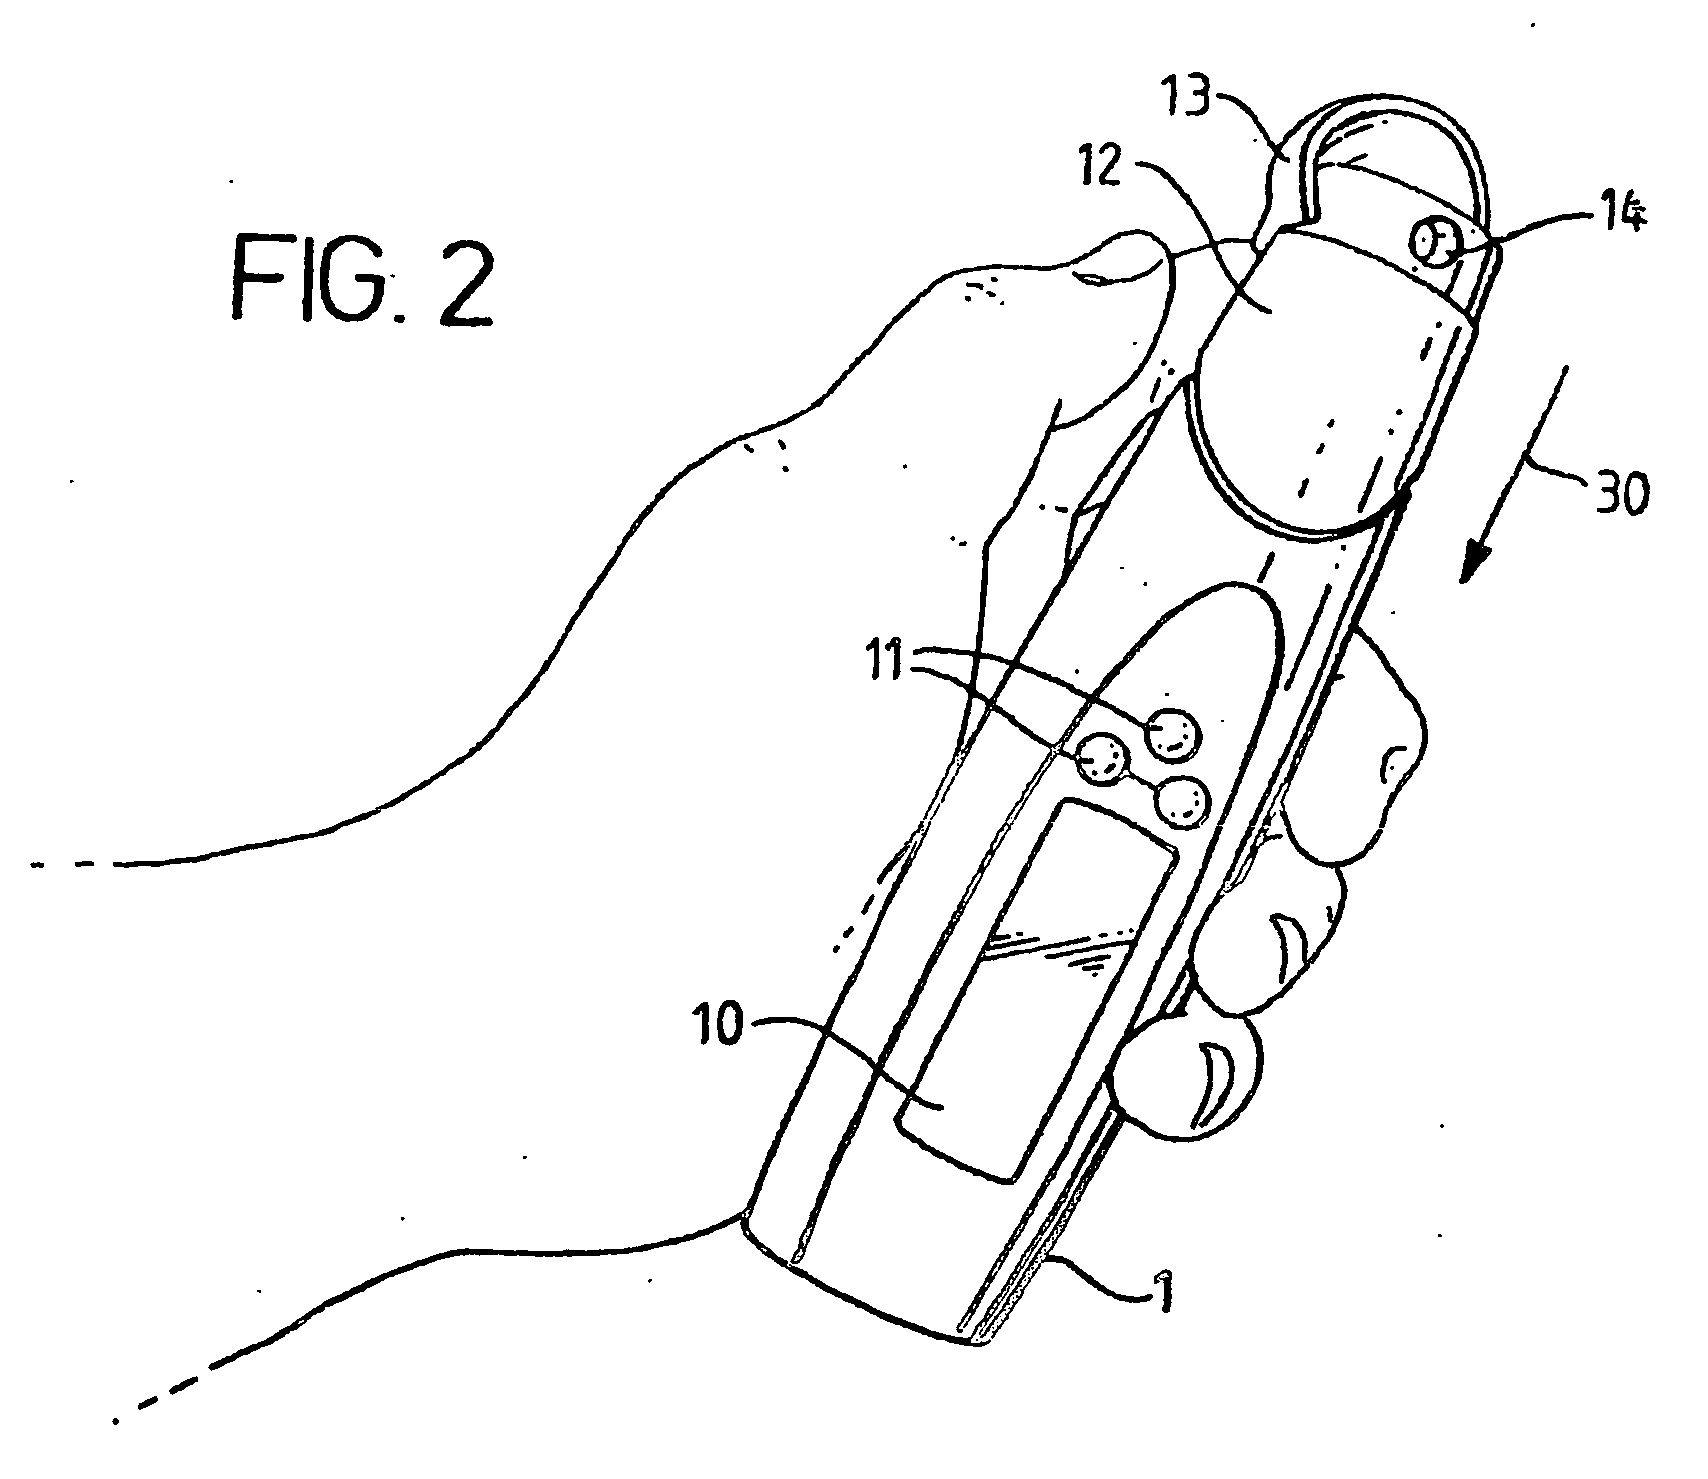 Dispenser with reservoir containing a drug of abuse